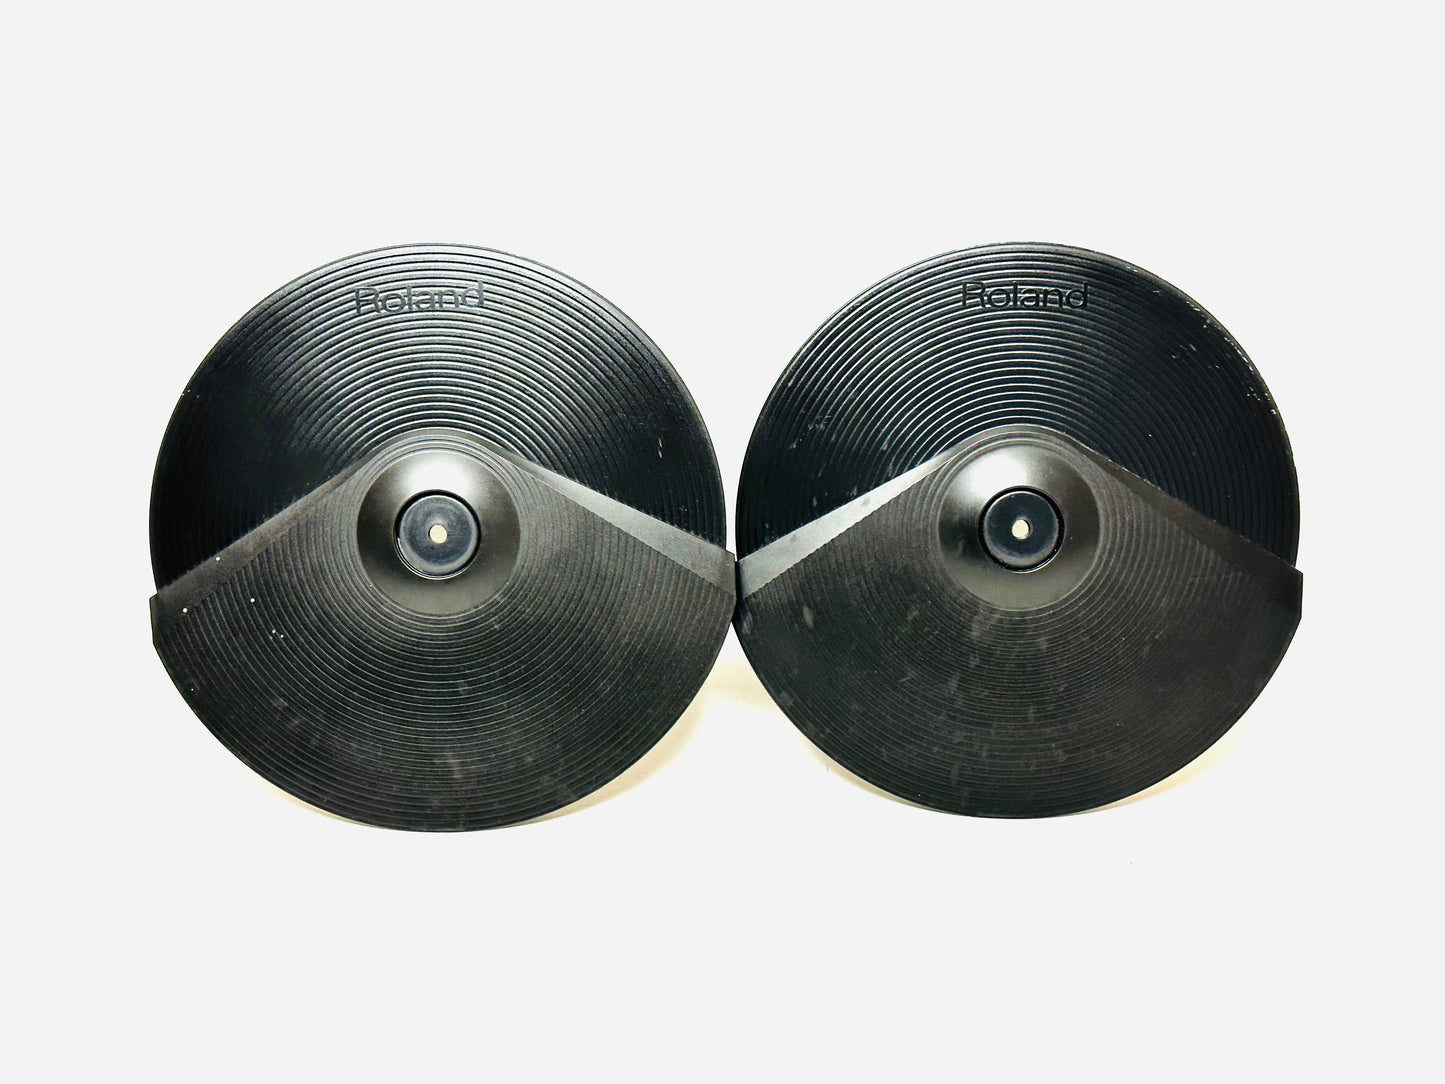 Pair of Roland CY-8 Crash Cymbal with Arm and Cable